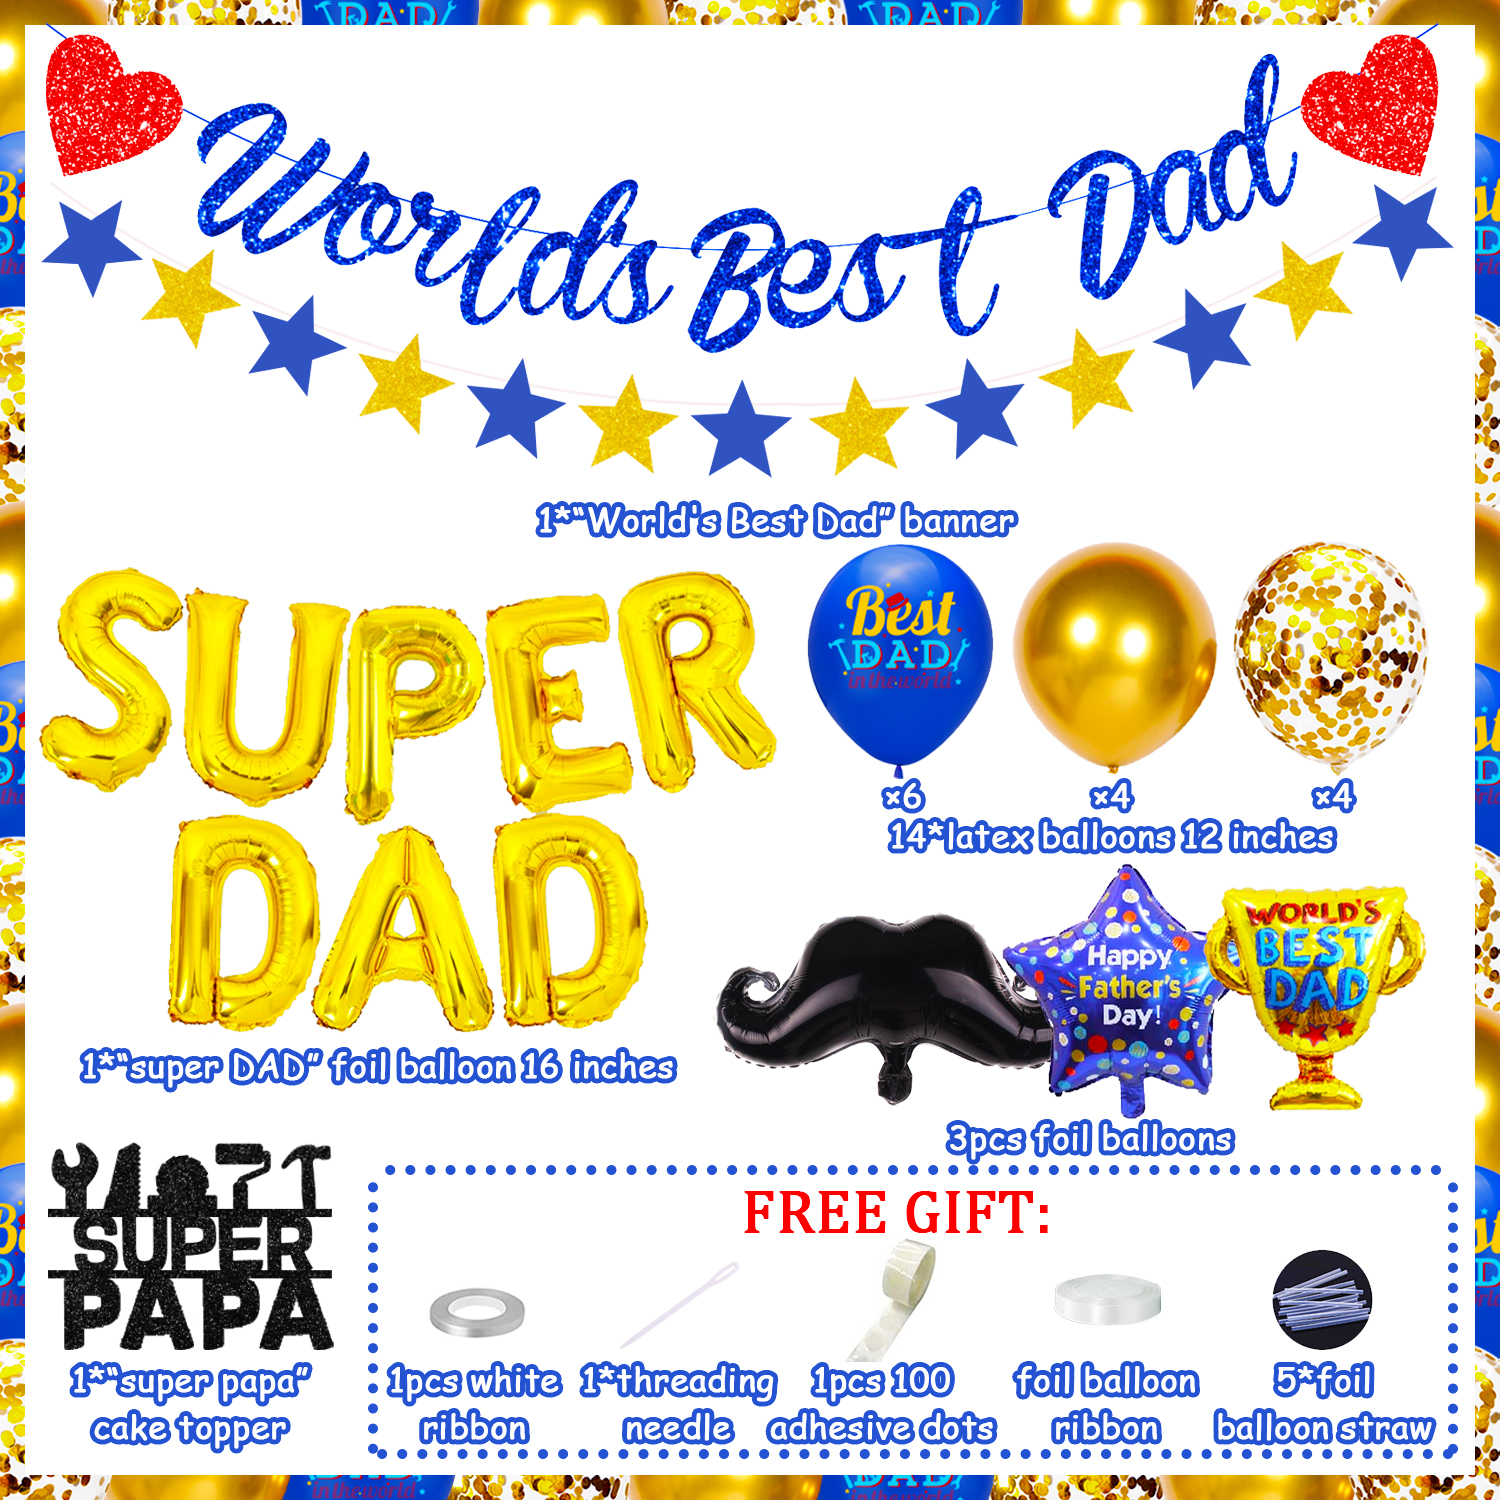 Happy Fathers Day Decorations - Super Dad Decorations for Father Birthday Party - World's Best Dad Banner and Best Dad Balloon - Super Dad Party Supplies for Home - image 5 of 6